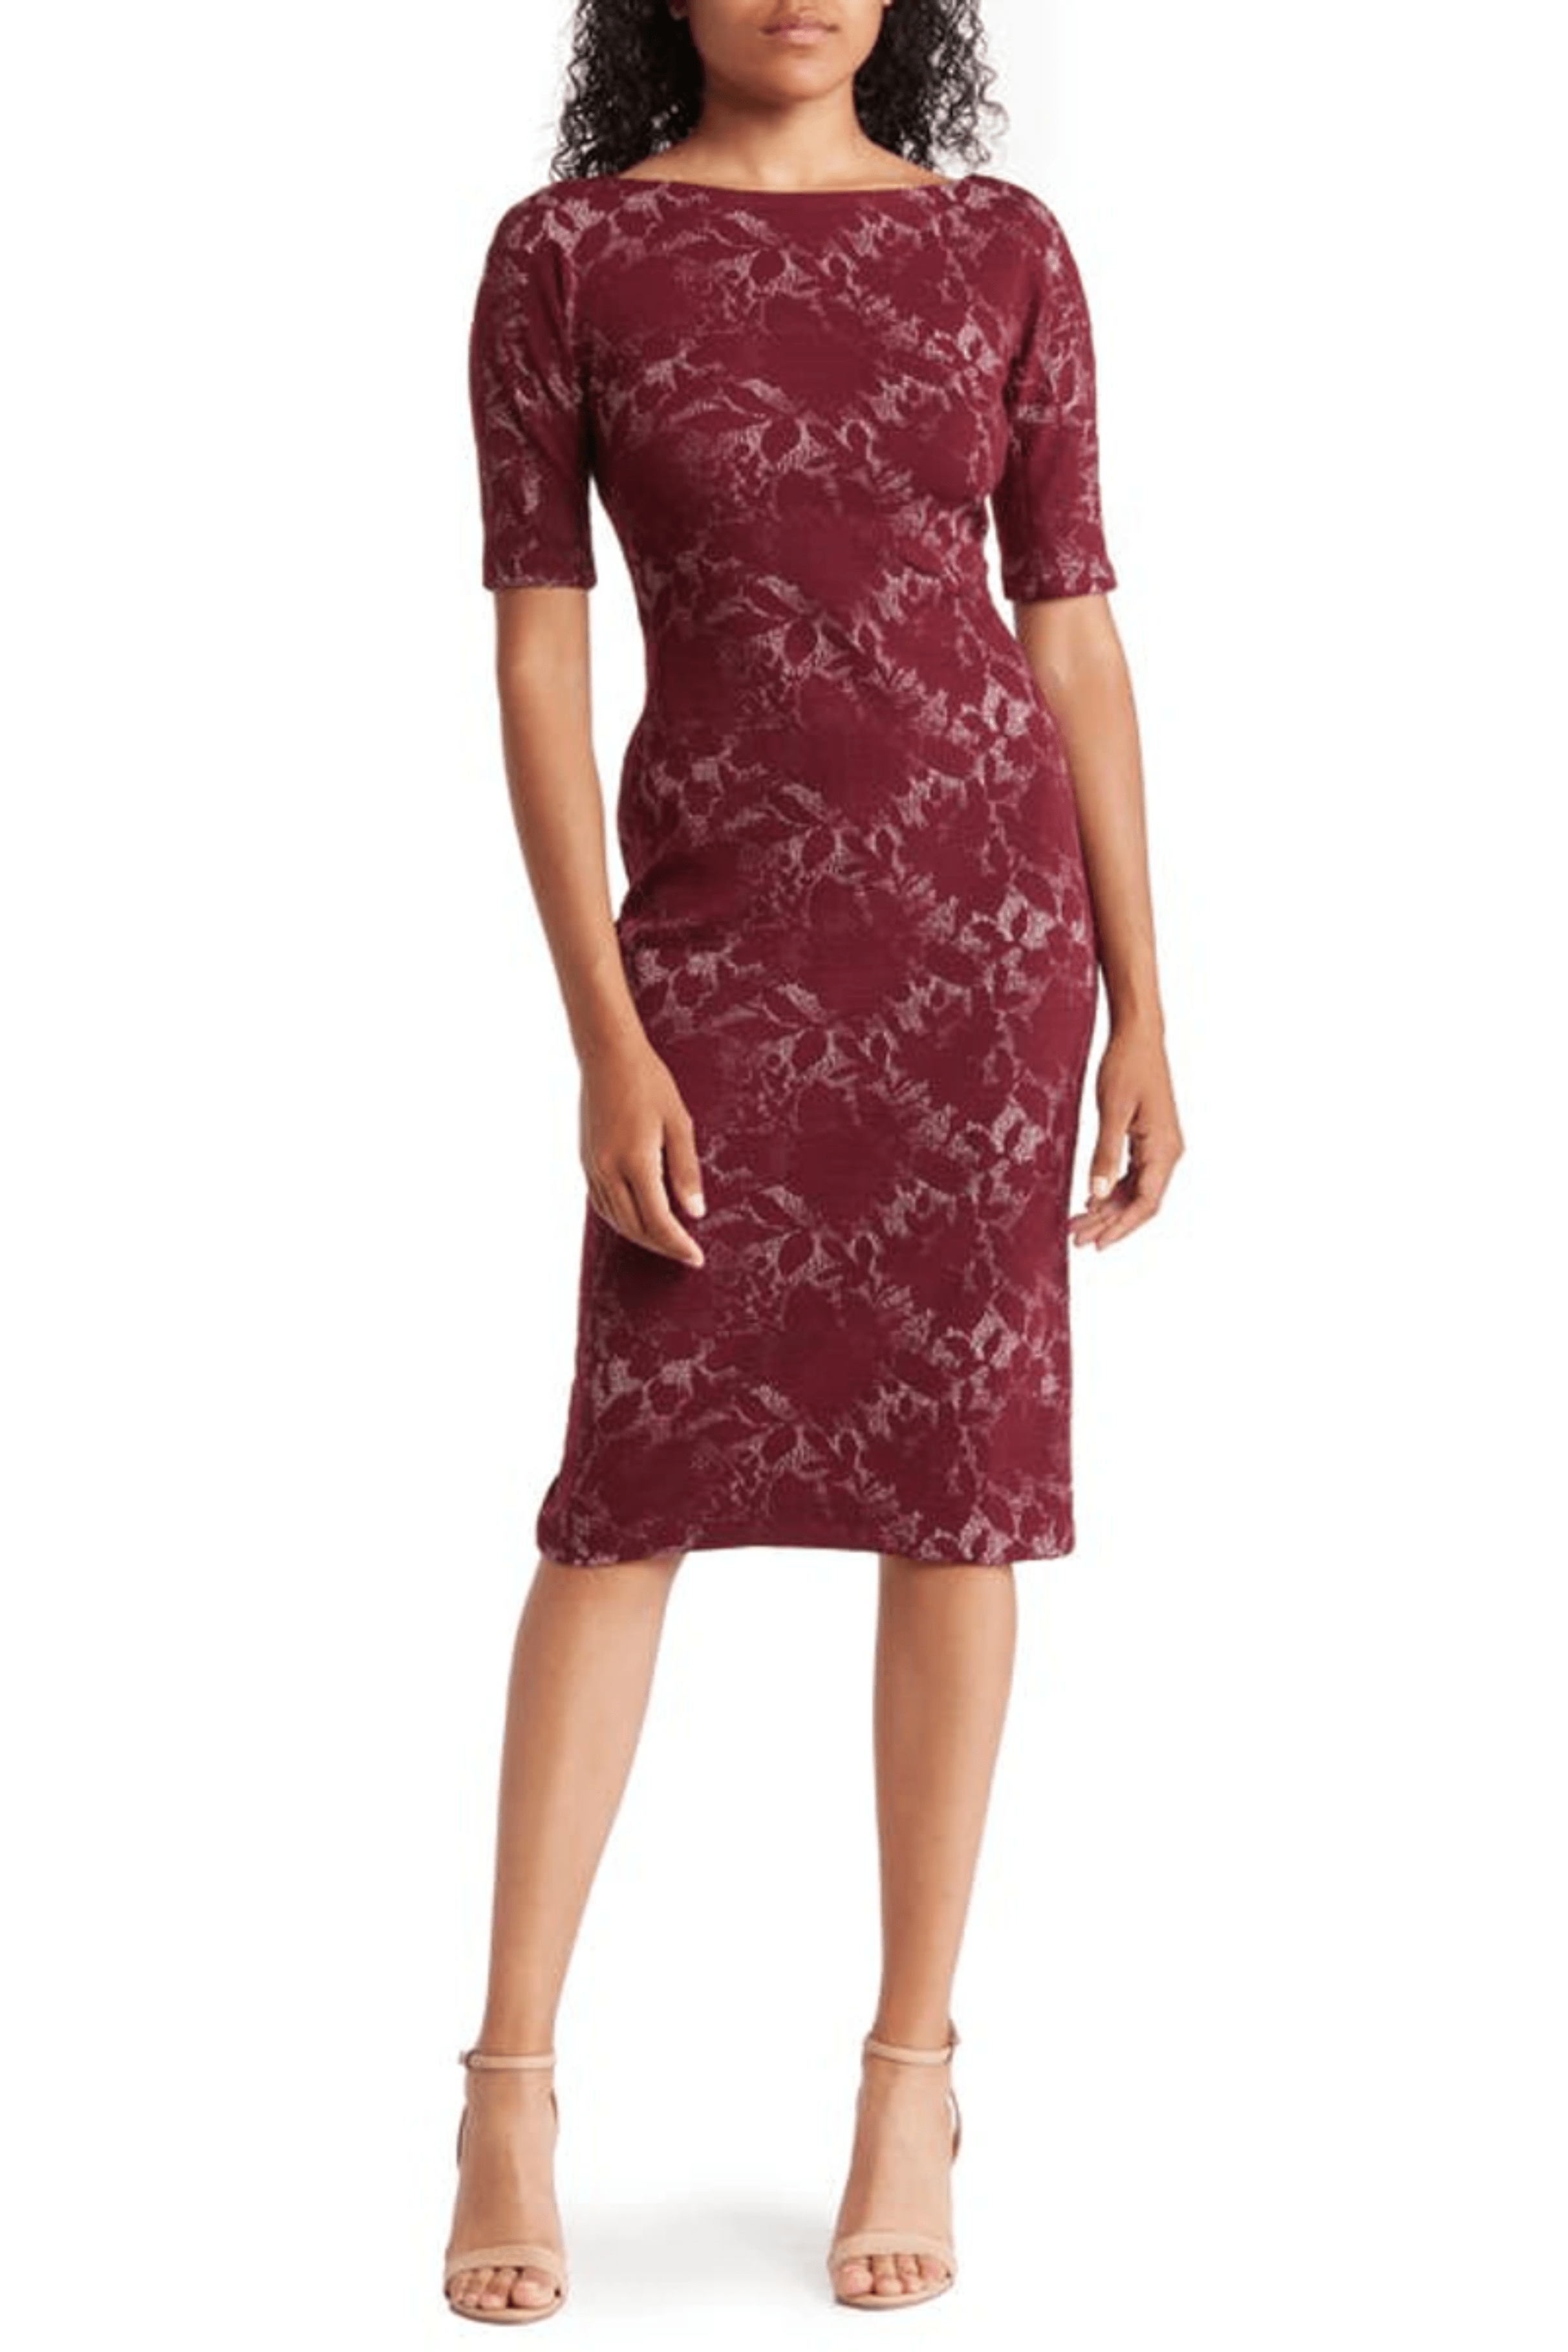 Image of Maggy London G3202M - Bateau Texture Printed Formal Dress